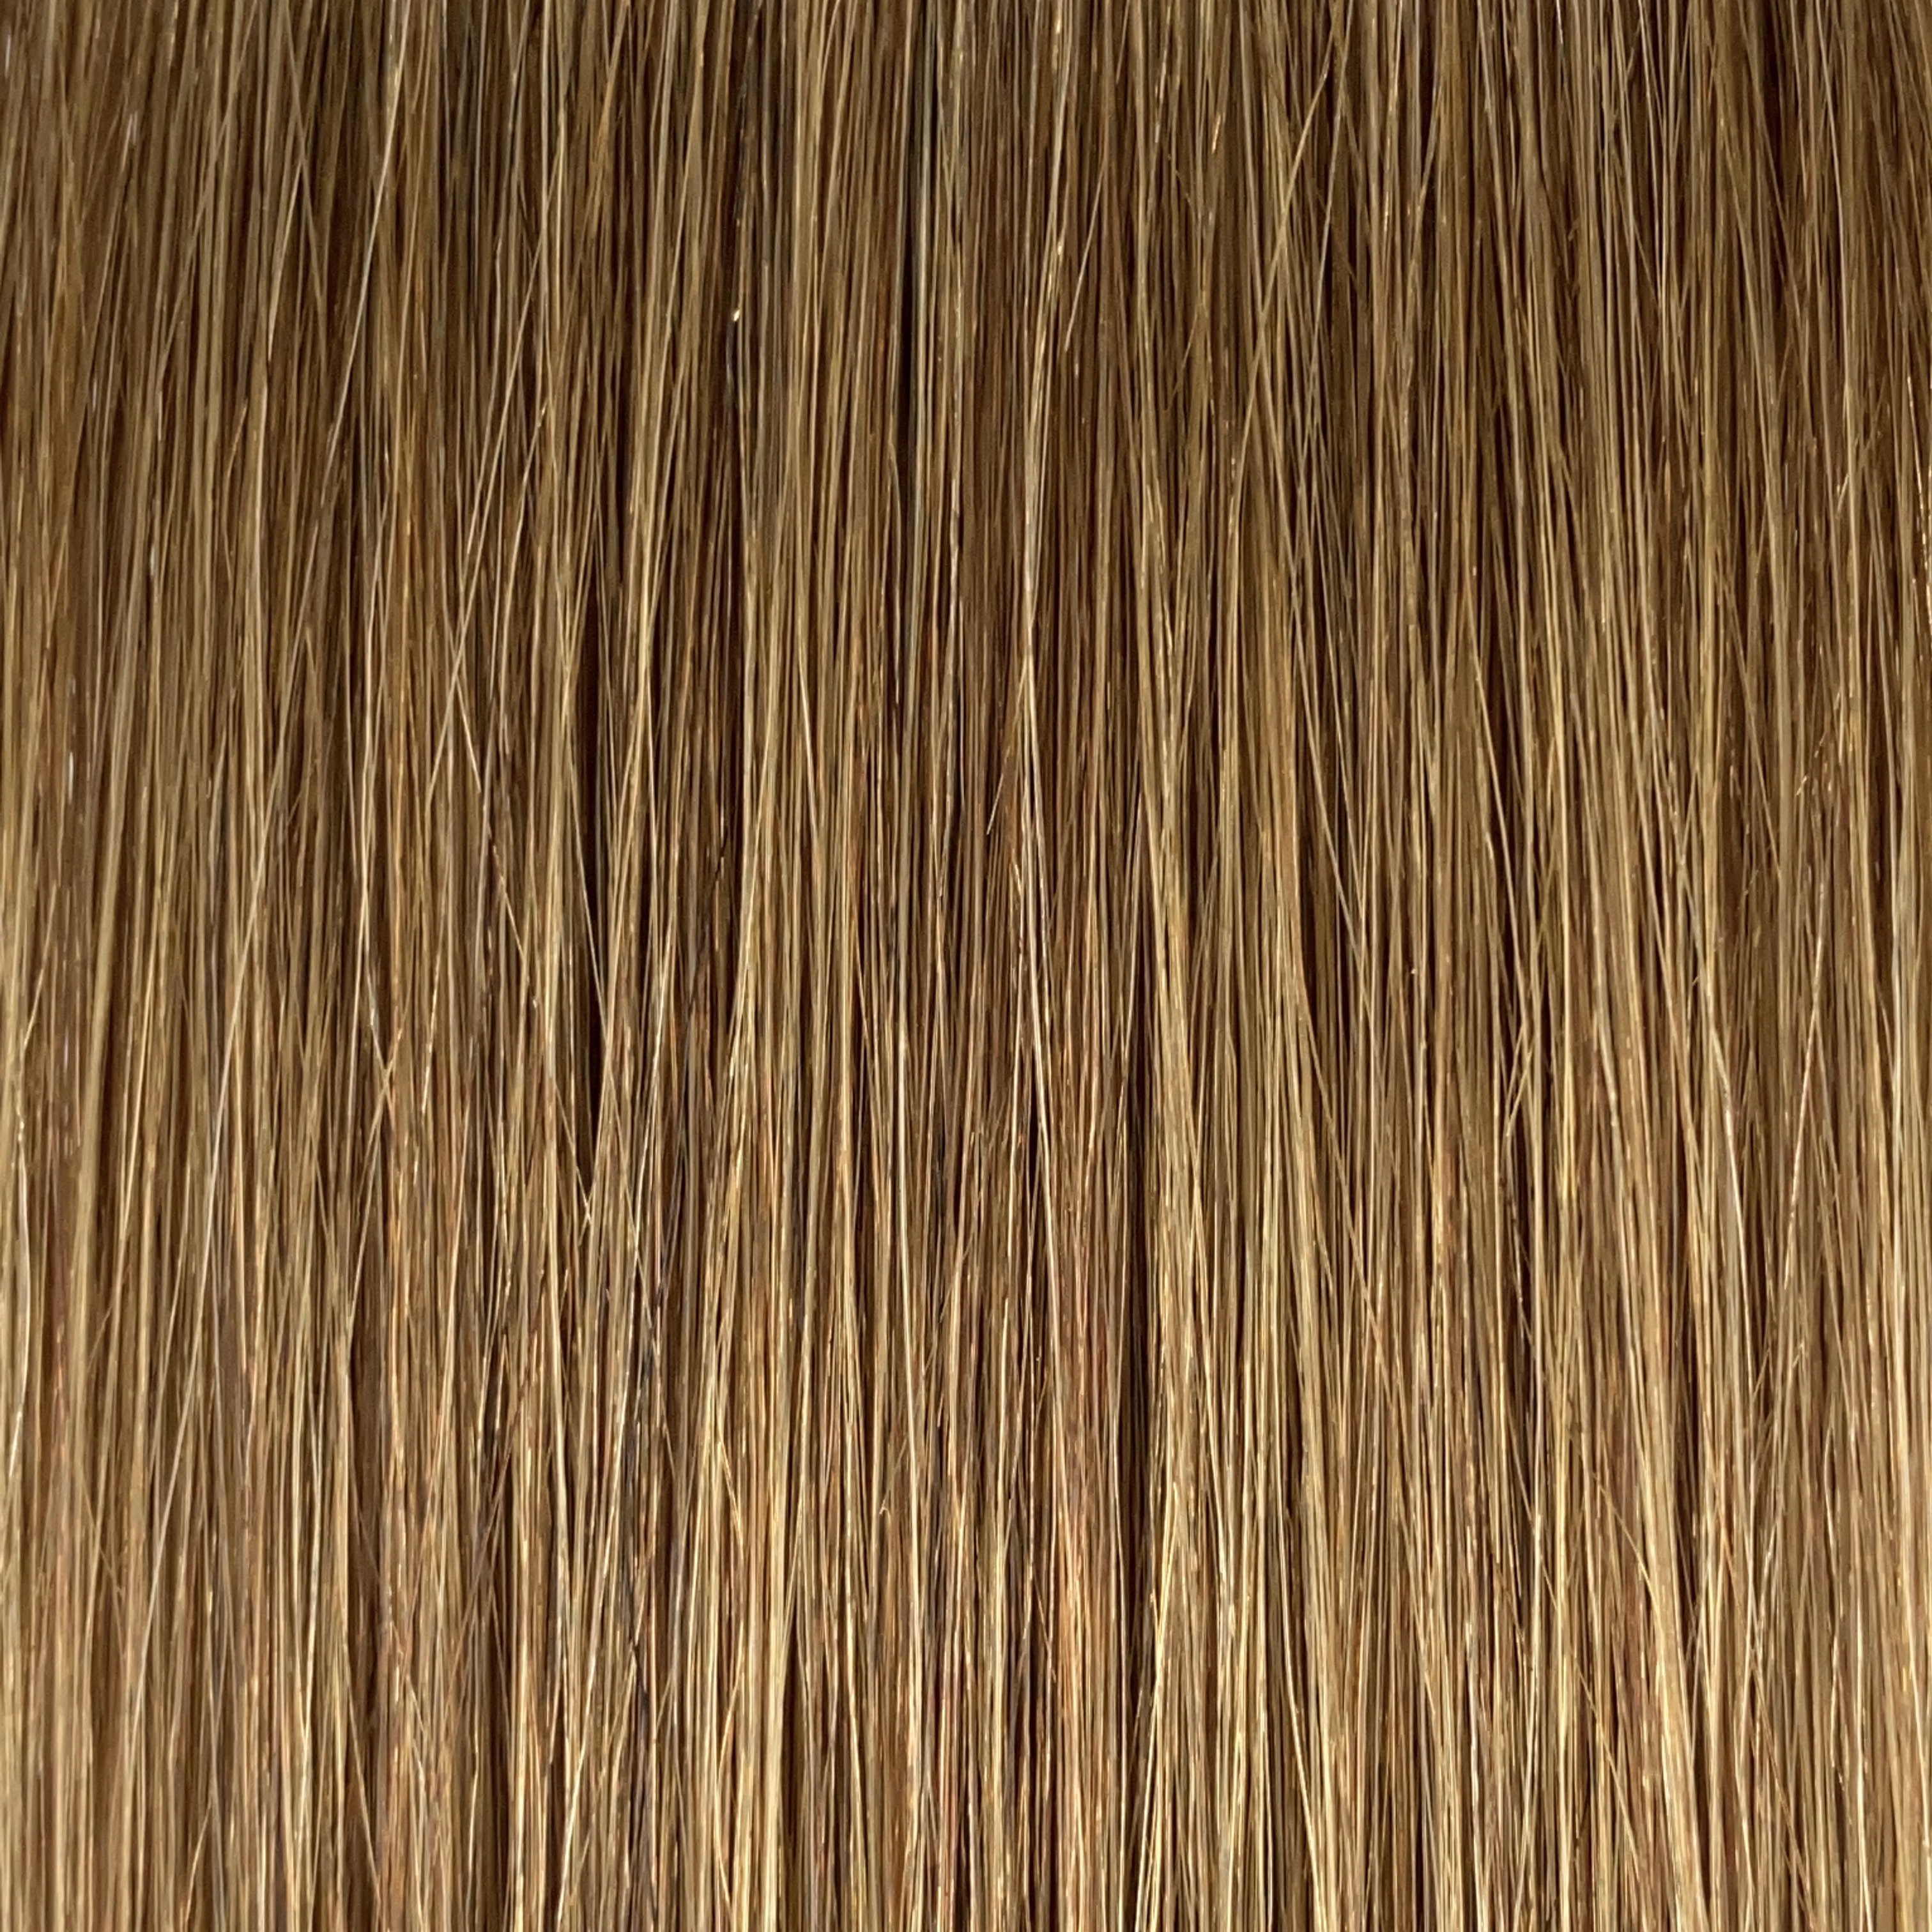 50 cm | Normal Tape Extensions | No. 08 light brown